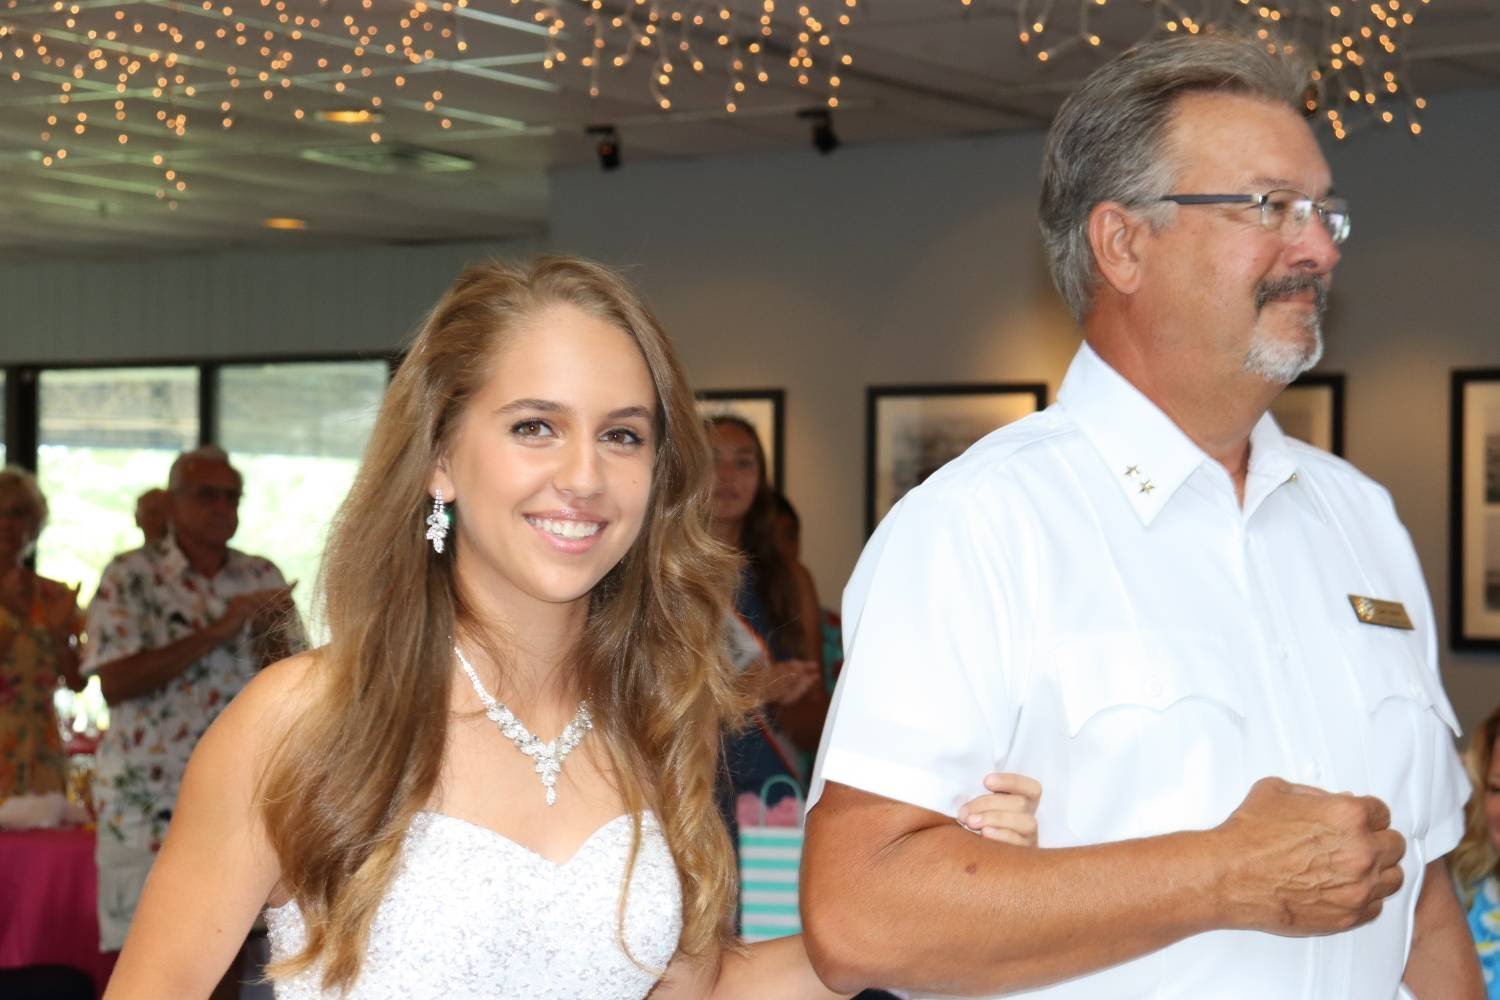 During the August 29 coronation, Kailey Schissler was escorted by incoming Commodore Carl Treff